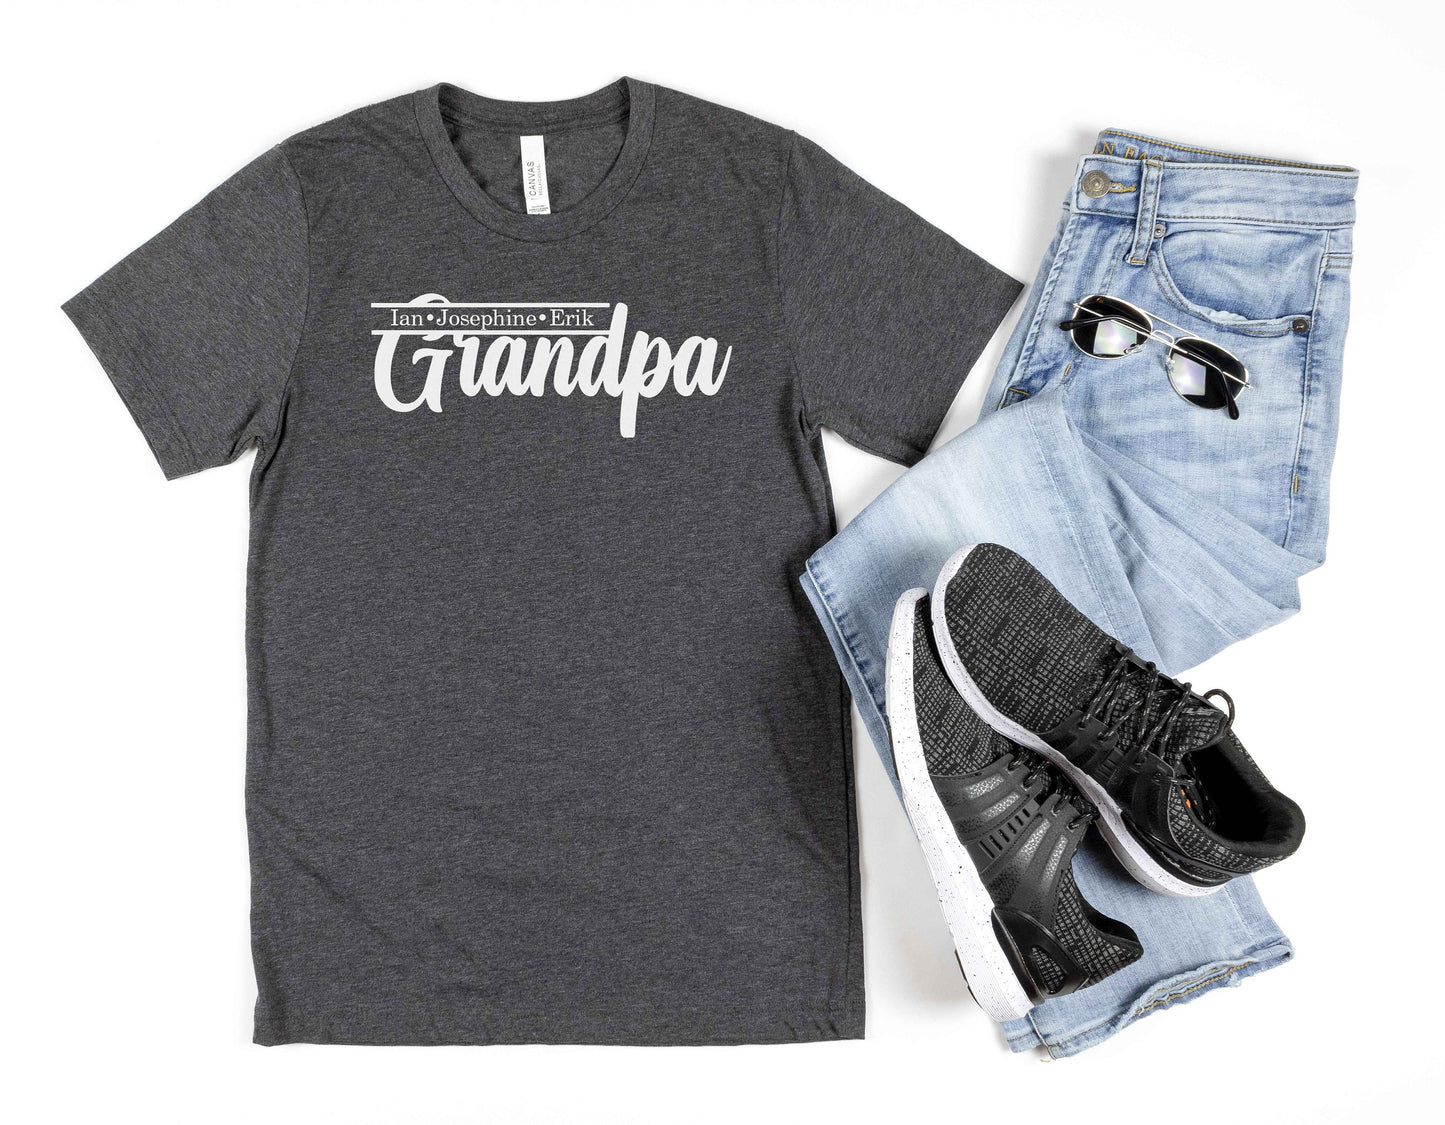 Personalized Grandpa Shirt with Grandkids Names - Father's Day Shirt